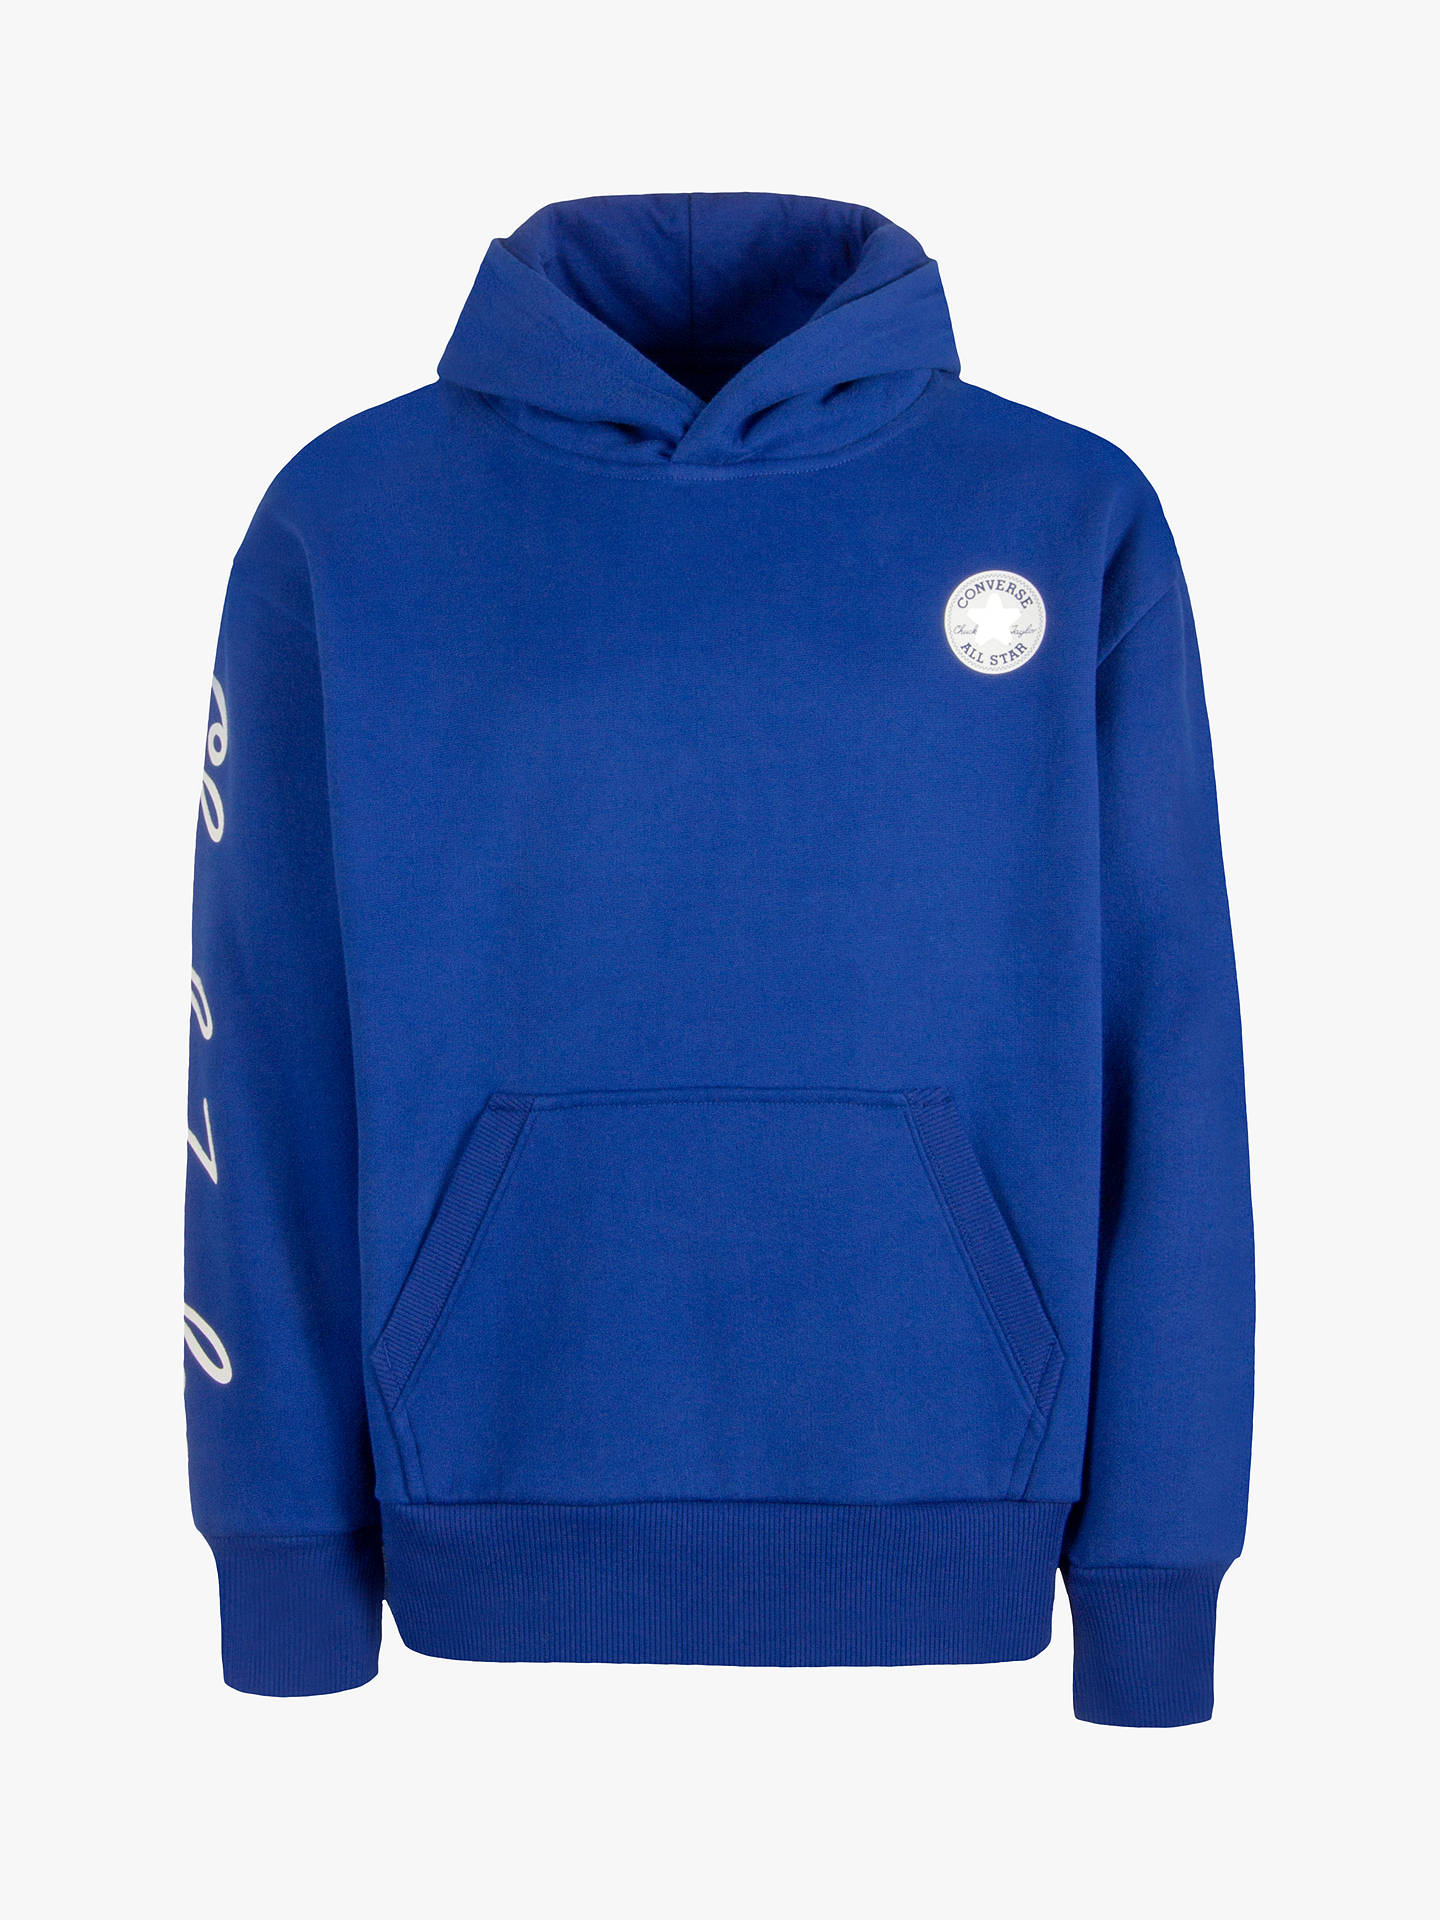 Converse Boys' Graphic Hoodie, Blue at John Lewis & Partners